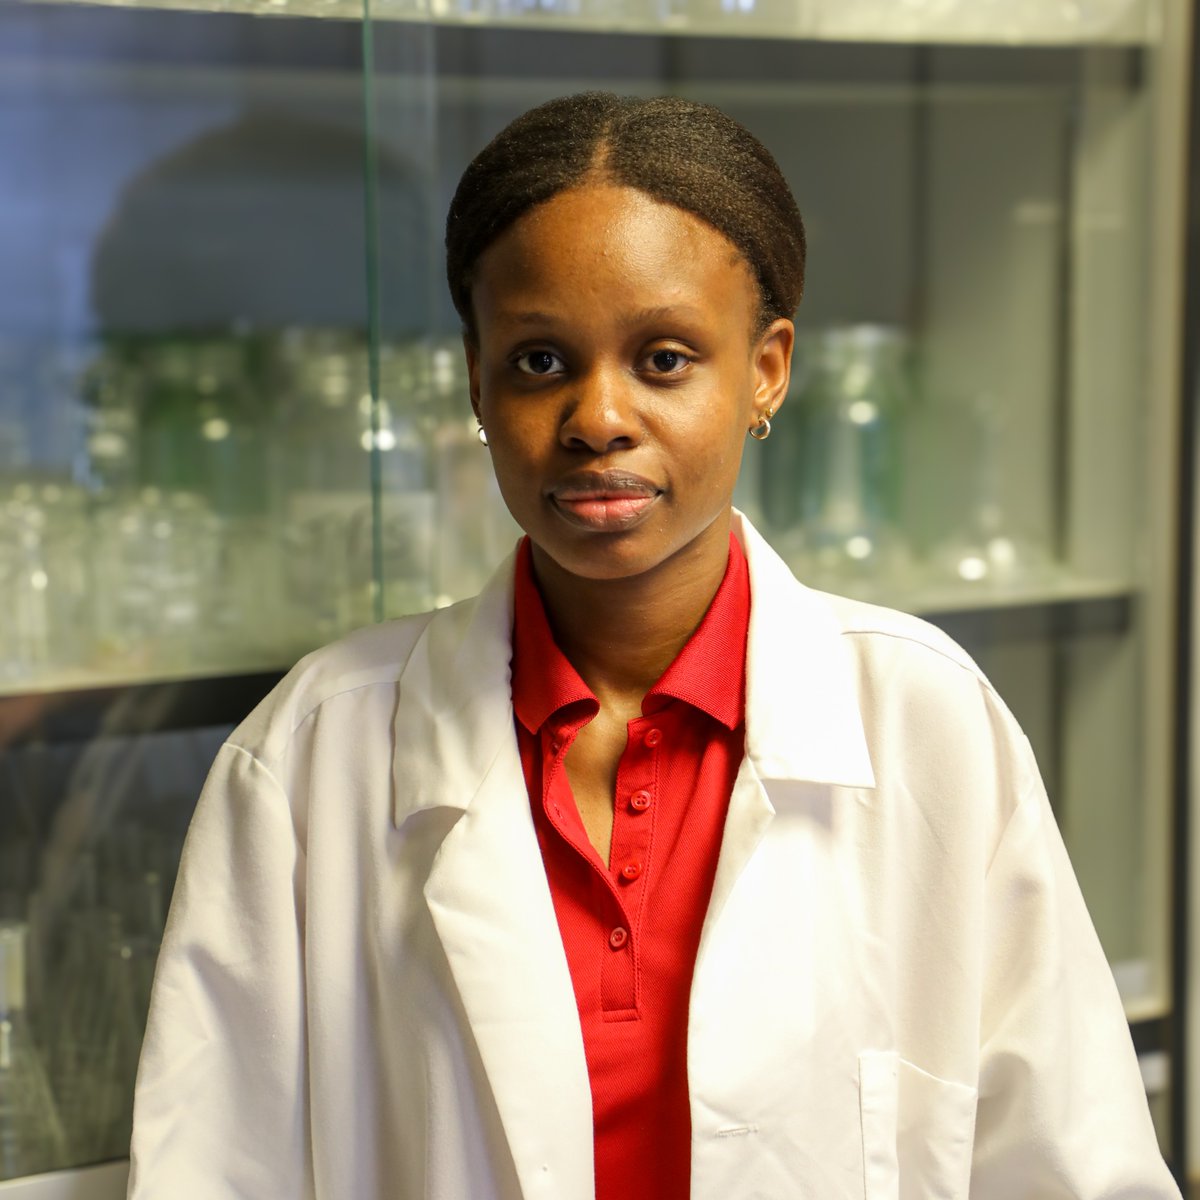 Food science Ph.D. student Faith Ouma is working with associate prof. Griffiths Atungulu to find optimal rice storage conditions to minimize the production of aflatoxin — a carcinogenic health hazard. #AgFoodLife #AgFoodInnovators @AginArk